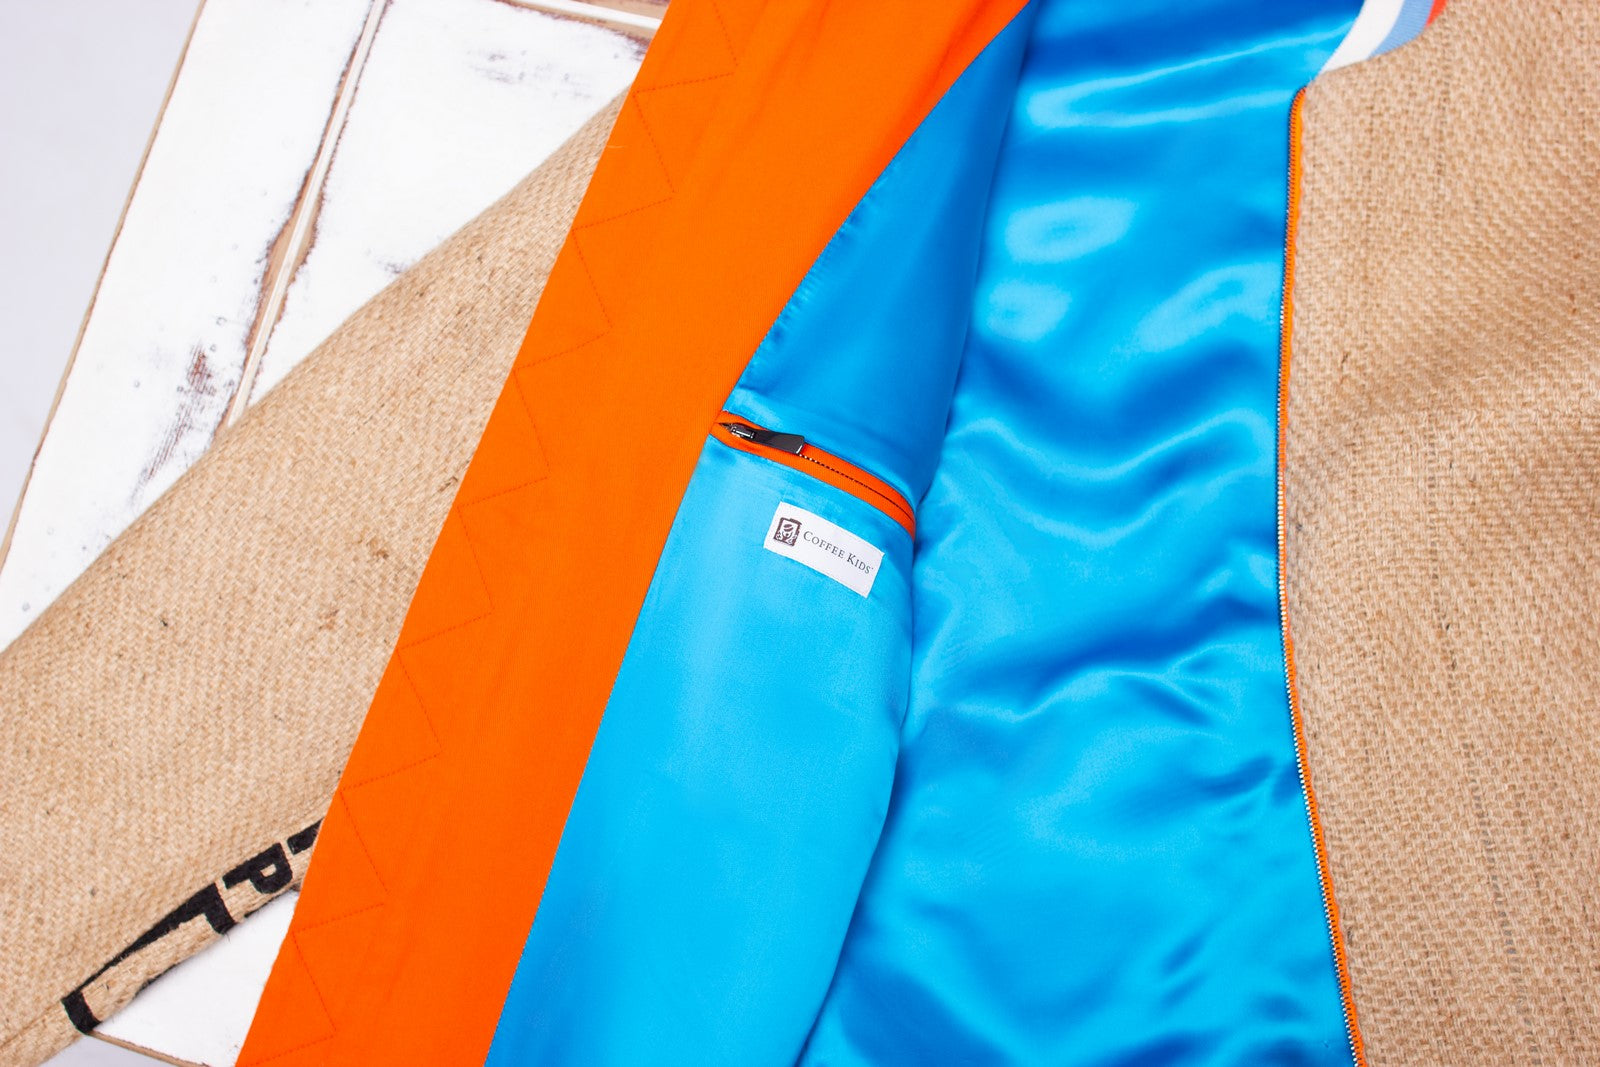 Colourful inner workings in sky blue and sunny orange of an exquisite eco-friendly jacket out of used coffee sacks